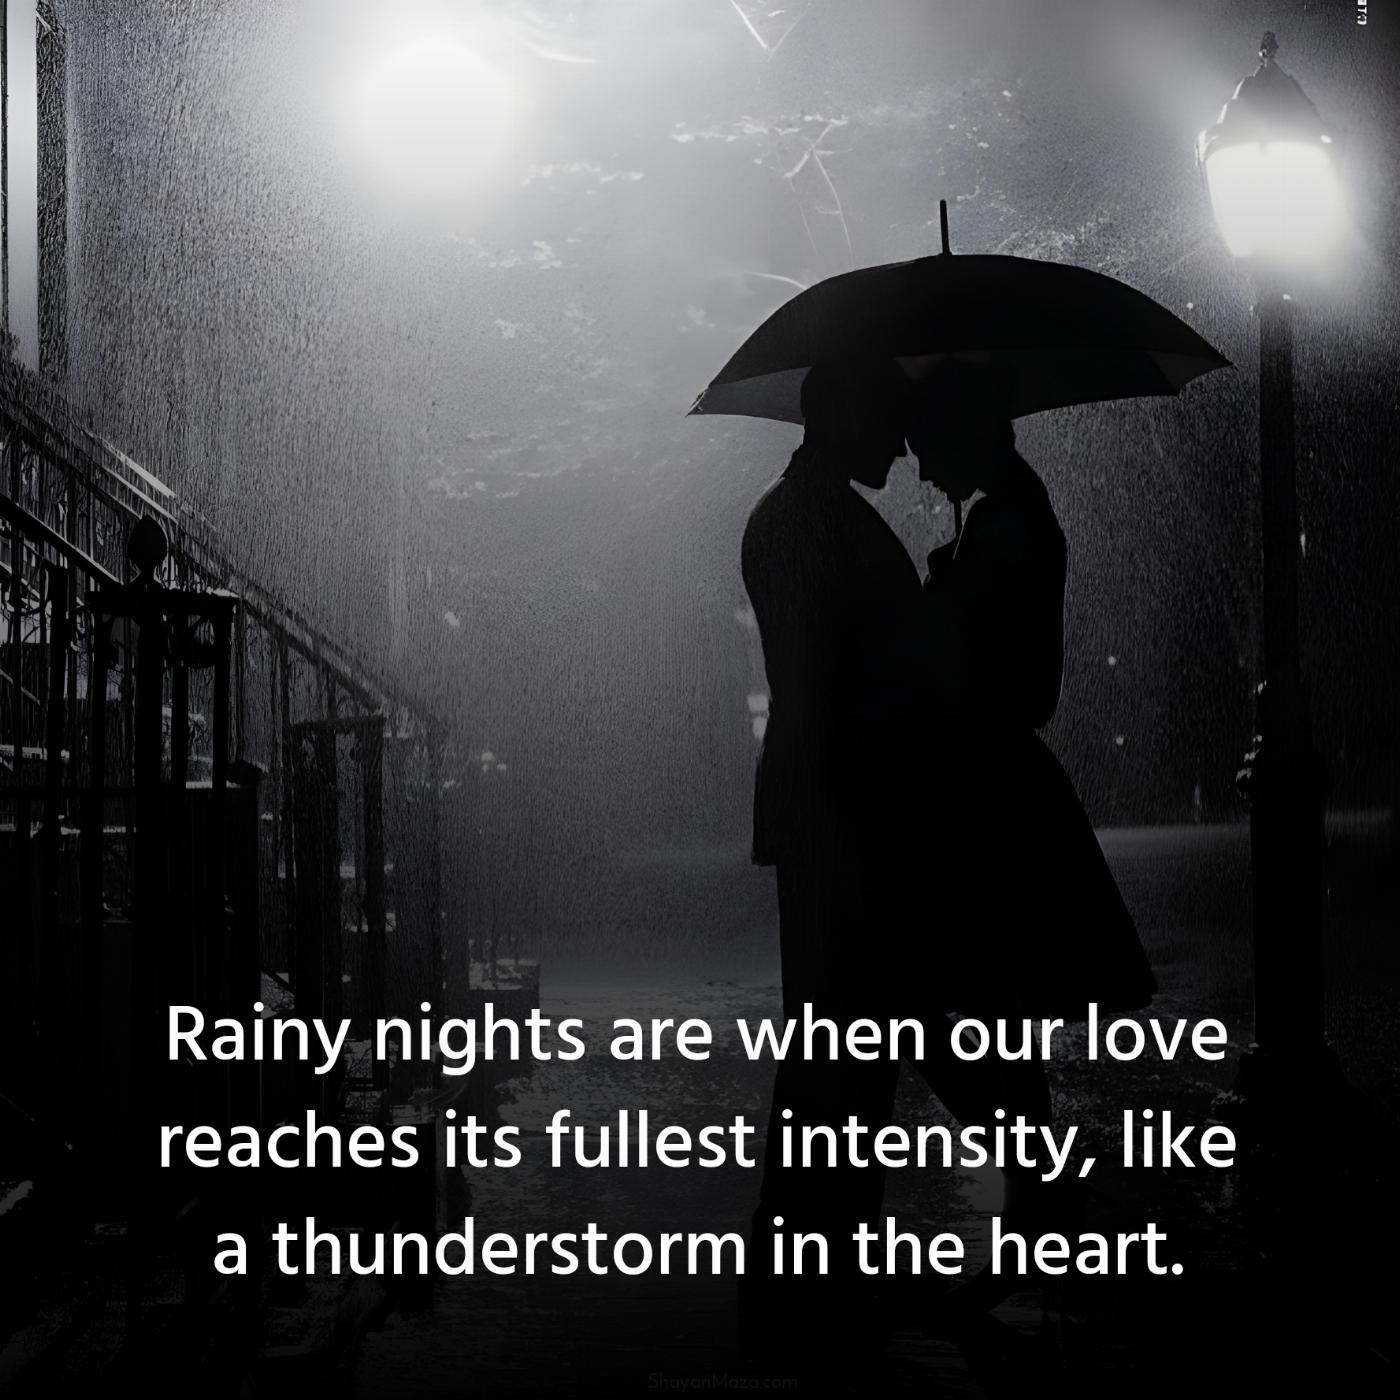 Rainy nights are when our love reaches its fullest intensity